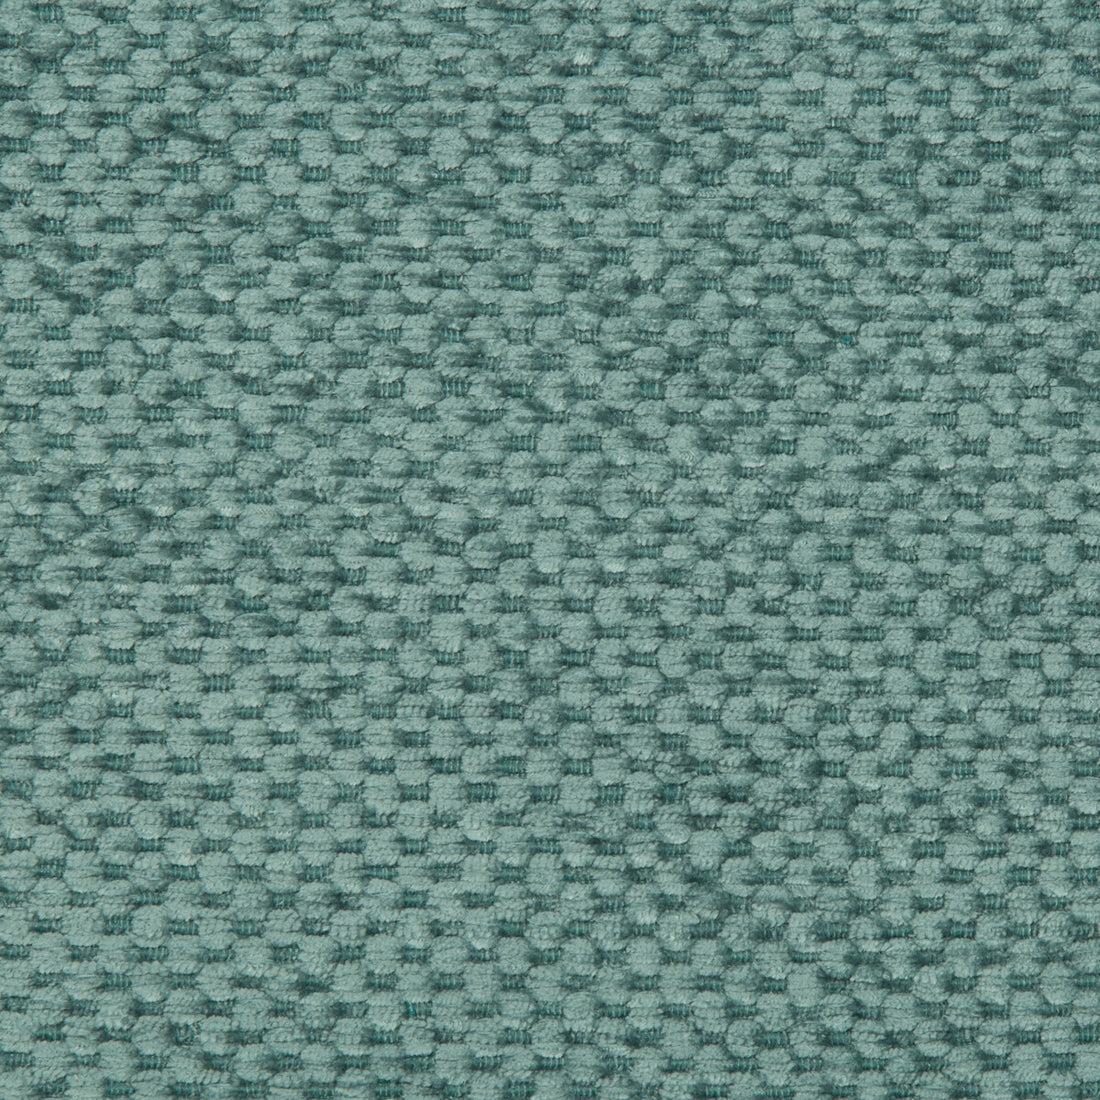 Kravet Contract fabric in 35134-35 color - pattern 35134.35.0 - by Kravet Contract in the Incase Crypton Gis collection